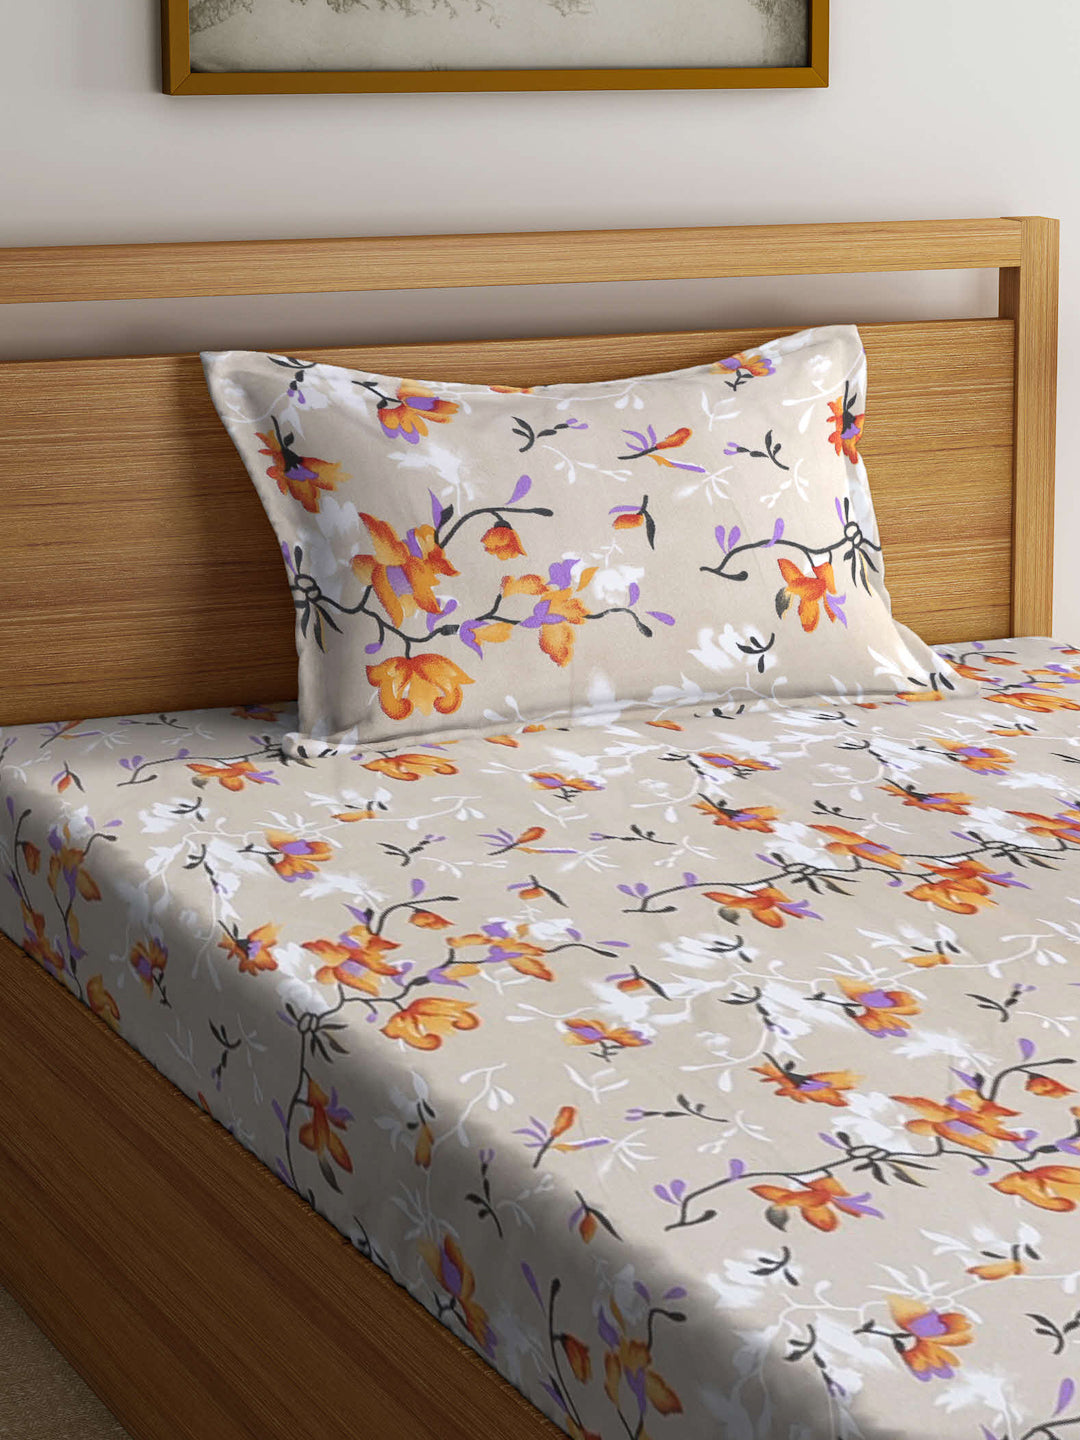 Arrabi Beige Floral TC Cotton Blend Single Size Fitted Bedsheet with 1 Pillow Cover (220 X 150 cm)